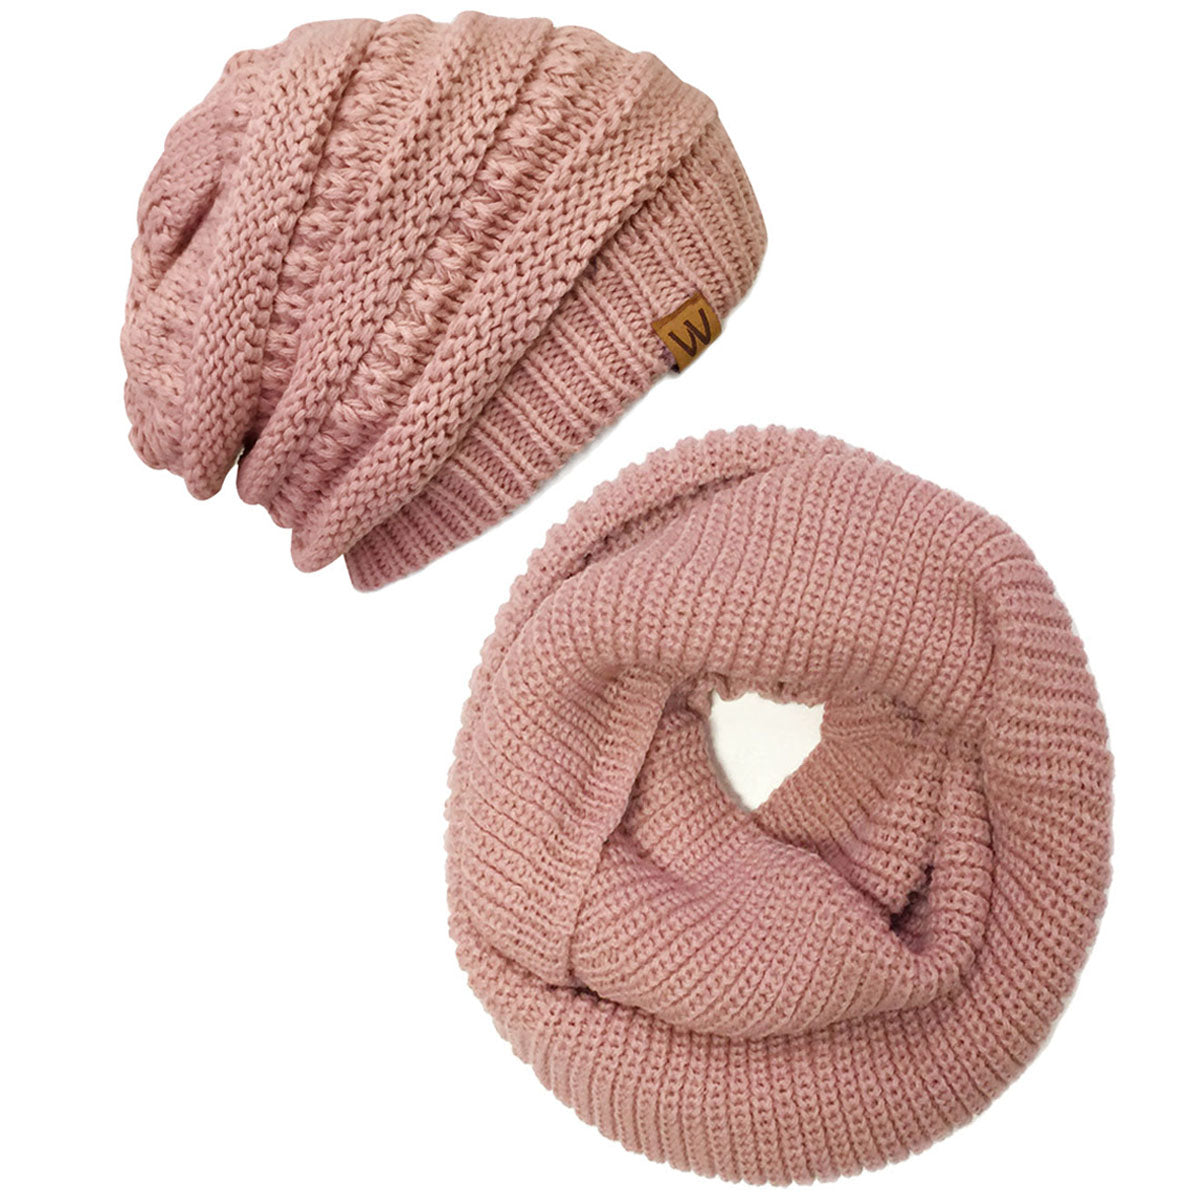 Wrapables Winter Warm Knitted Infinity Scarf and Beanie Hat Set